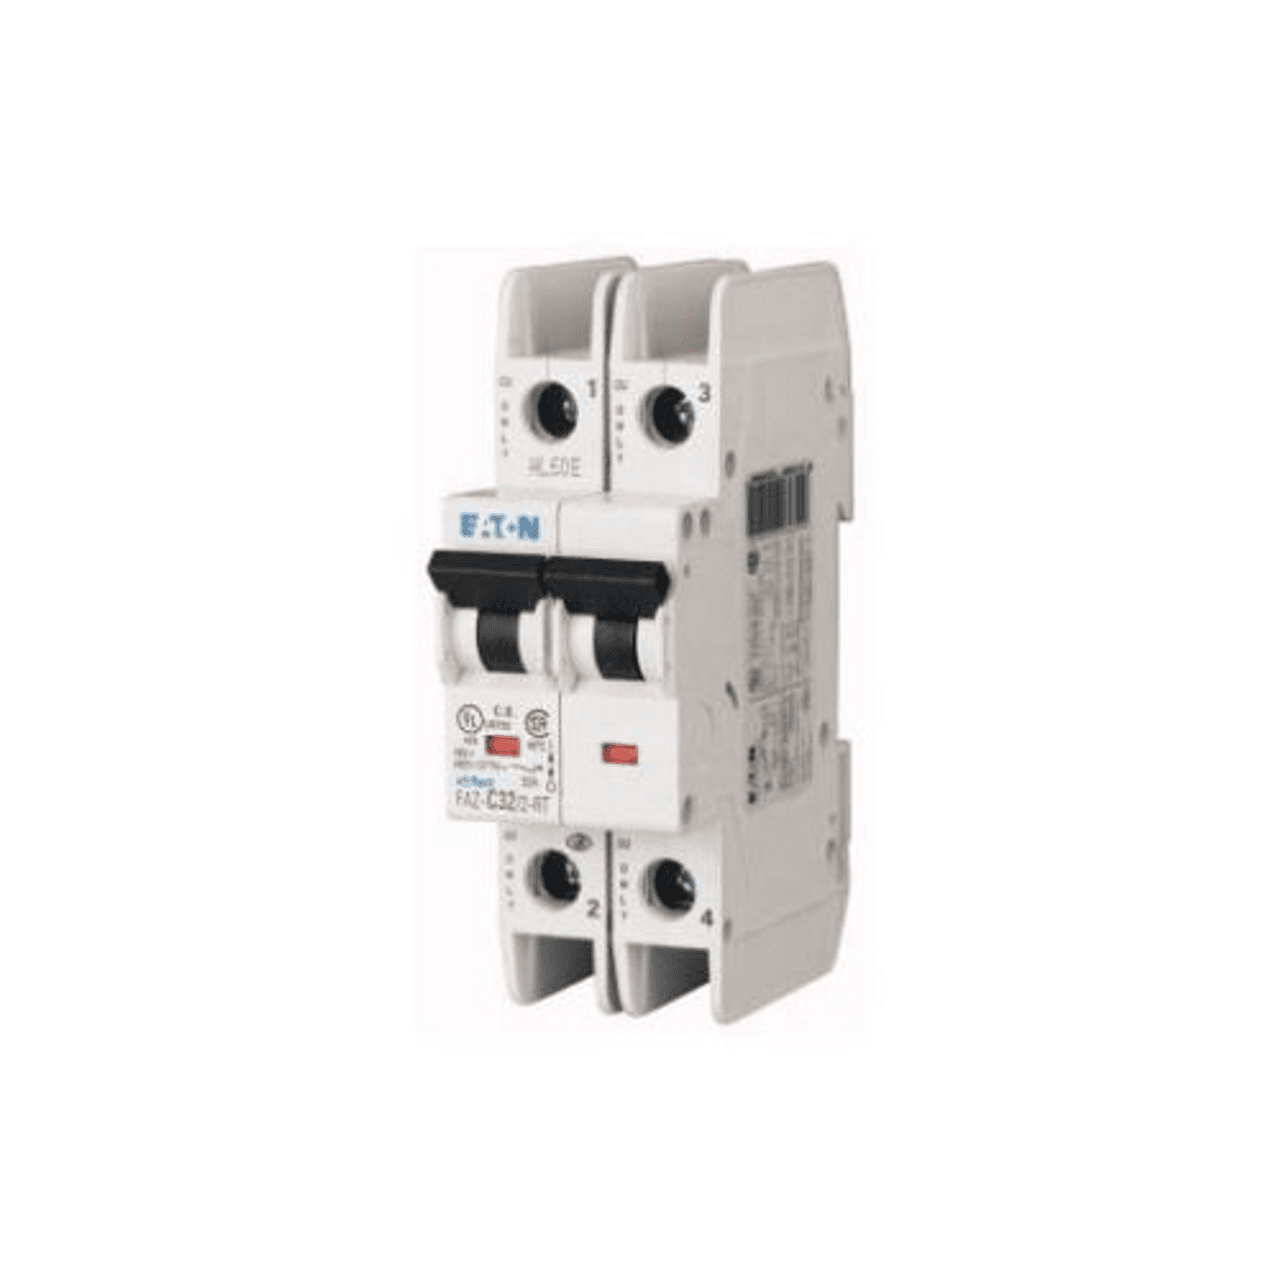 Eaton FAZ-D5/2-RT 277/480 VAC 50/60 Hz, 5 A, 2-Pole, 10/14 kA, 10 to 20 x Rated Current, Ring Tongue Terminal, DIN Rail Mount, Standard Packaging, D-Curve, Current Limiting, Thermal Magnetic